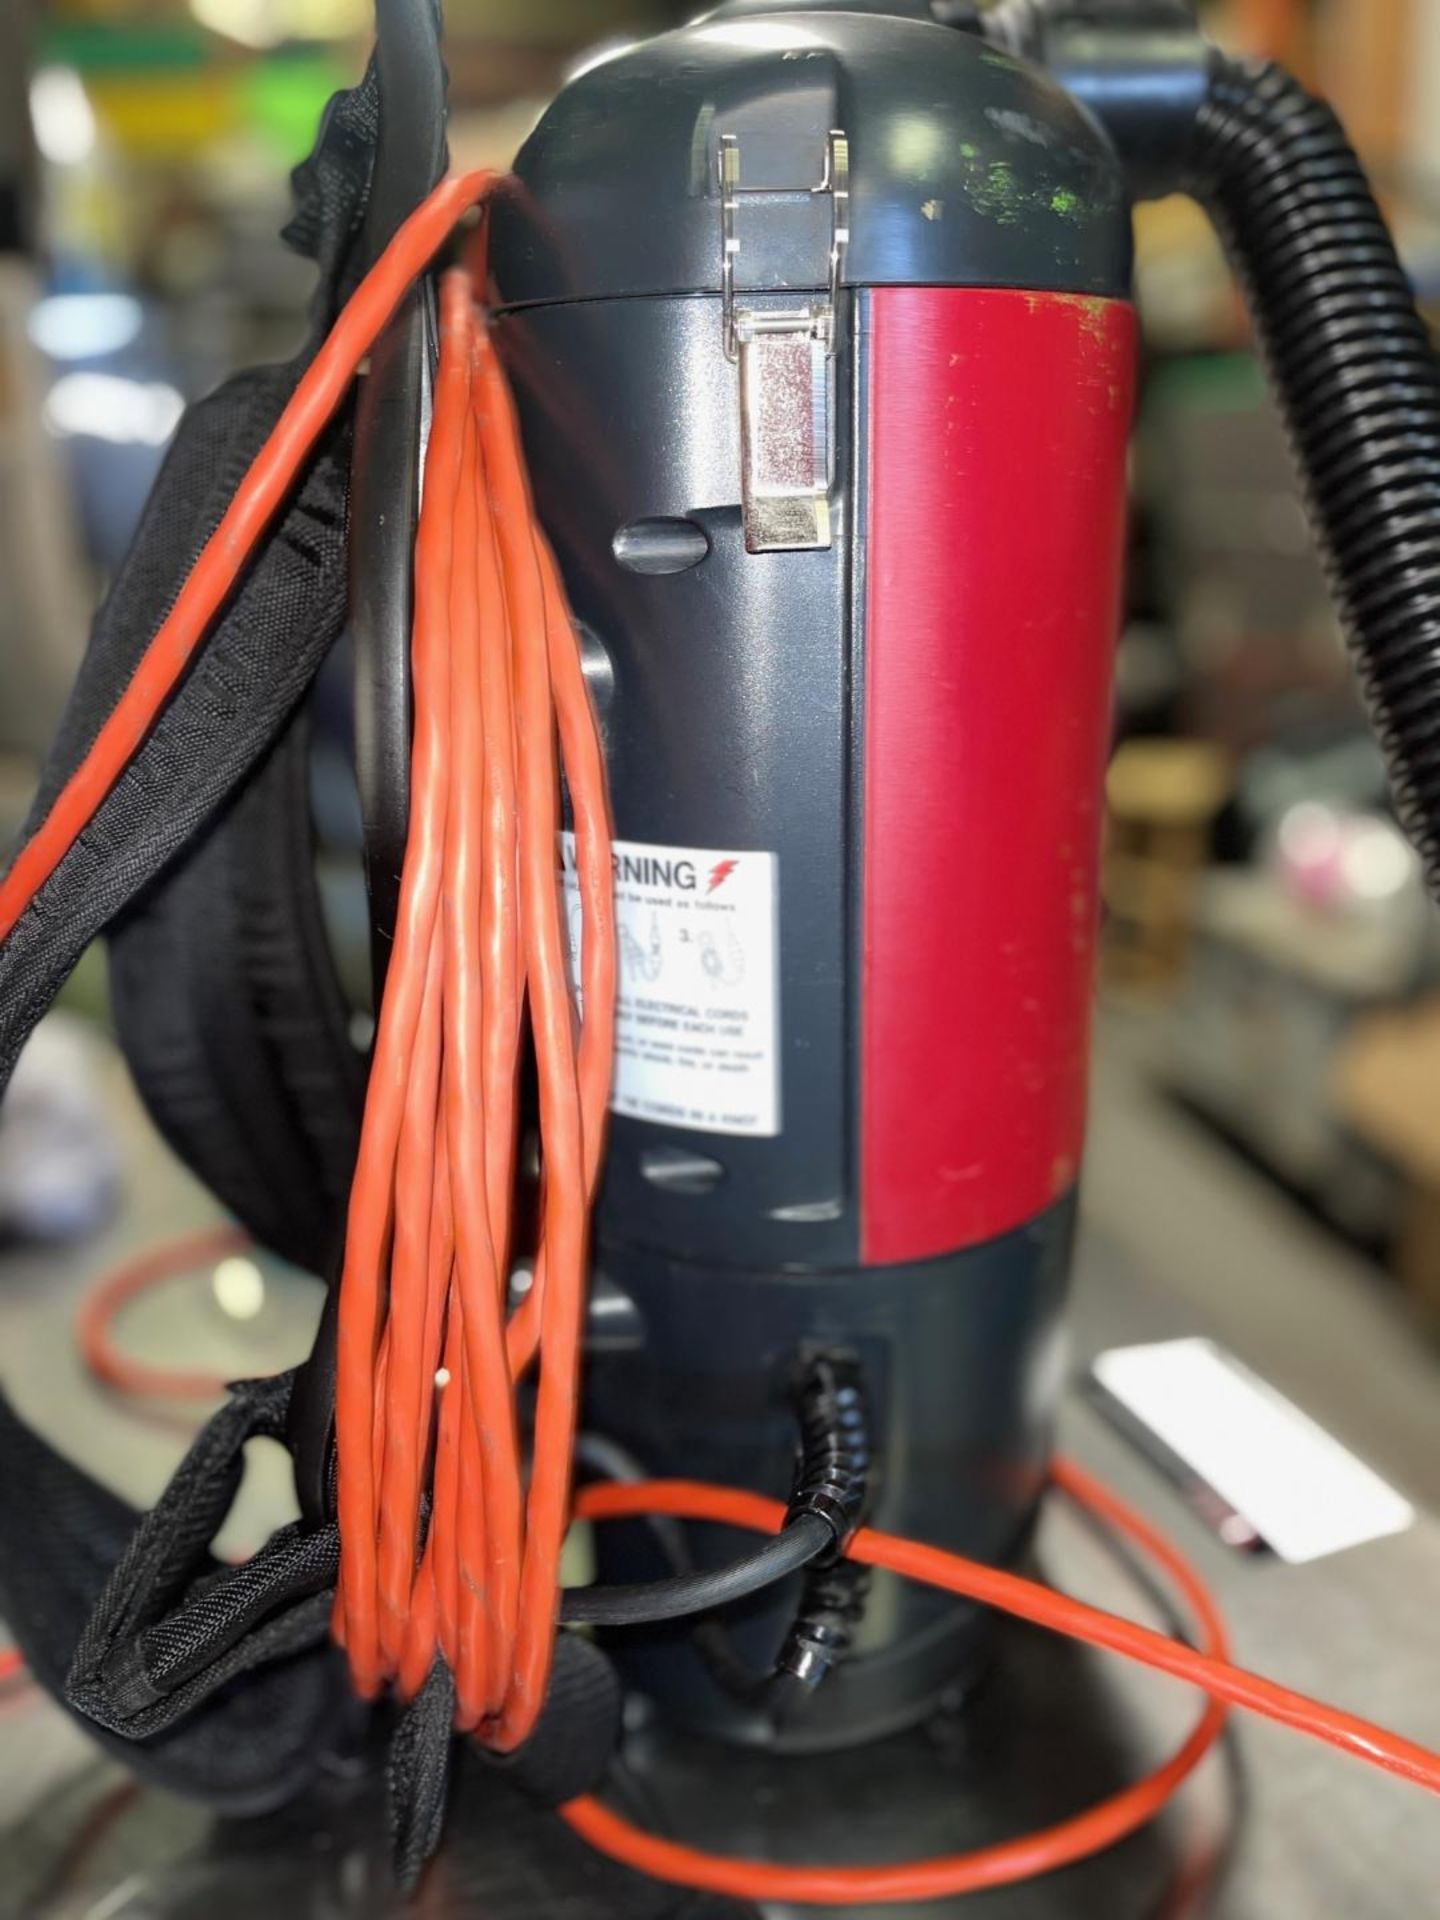 SANITAIRE SC412 BACKPACK VACUUM CLEANER WITH 50-FOOT POWER CORD(SUBJECT TO BULK BID LOT 99)